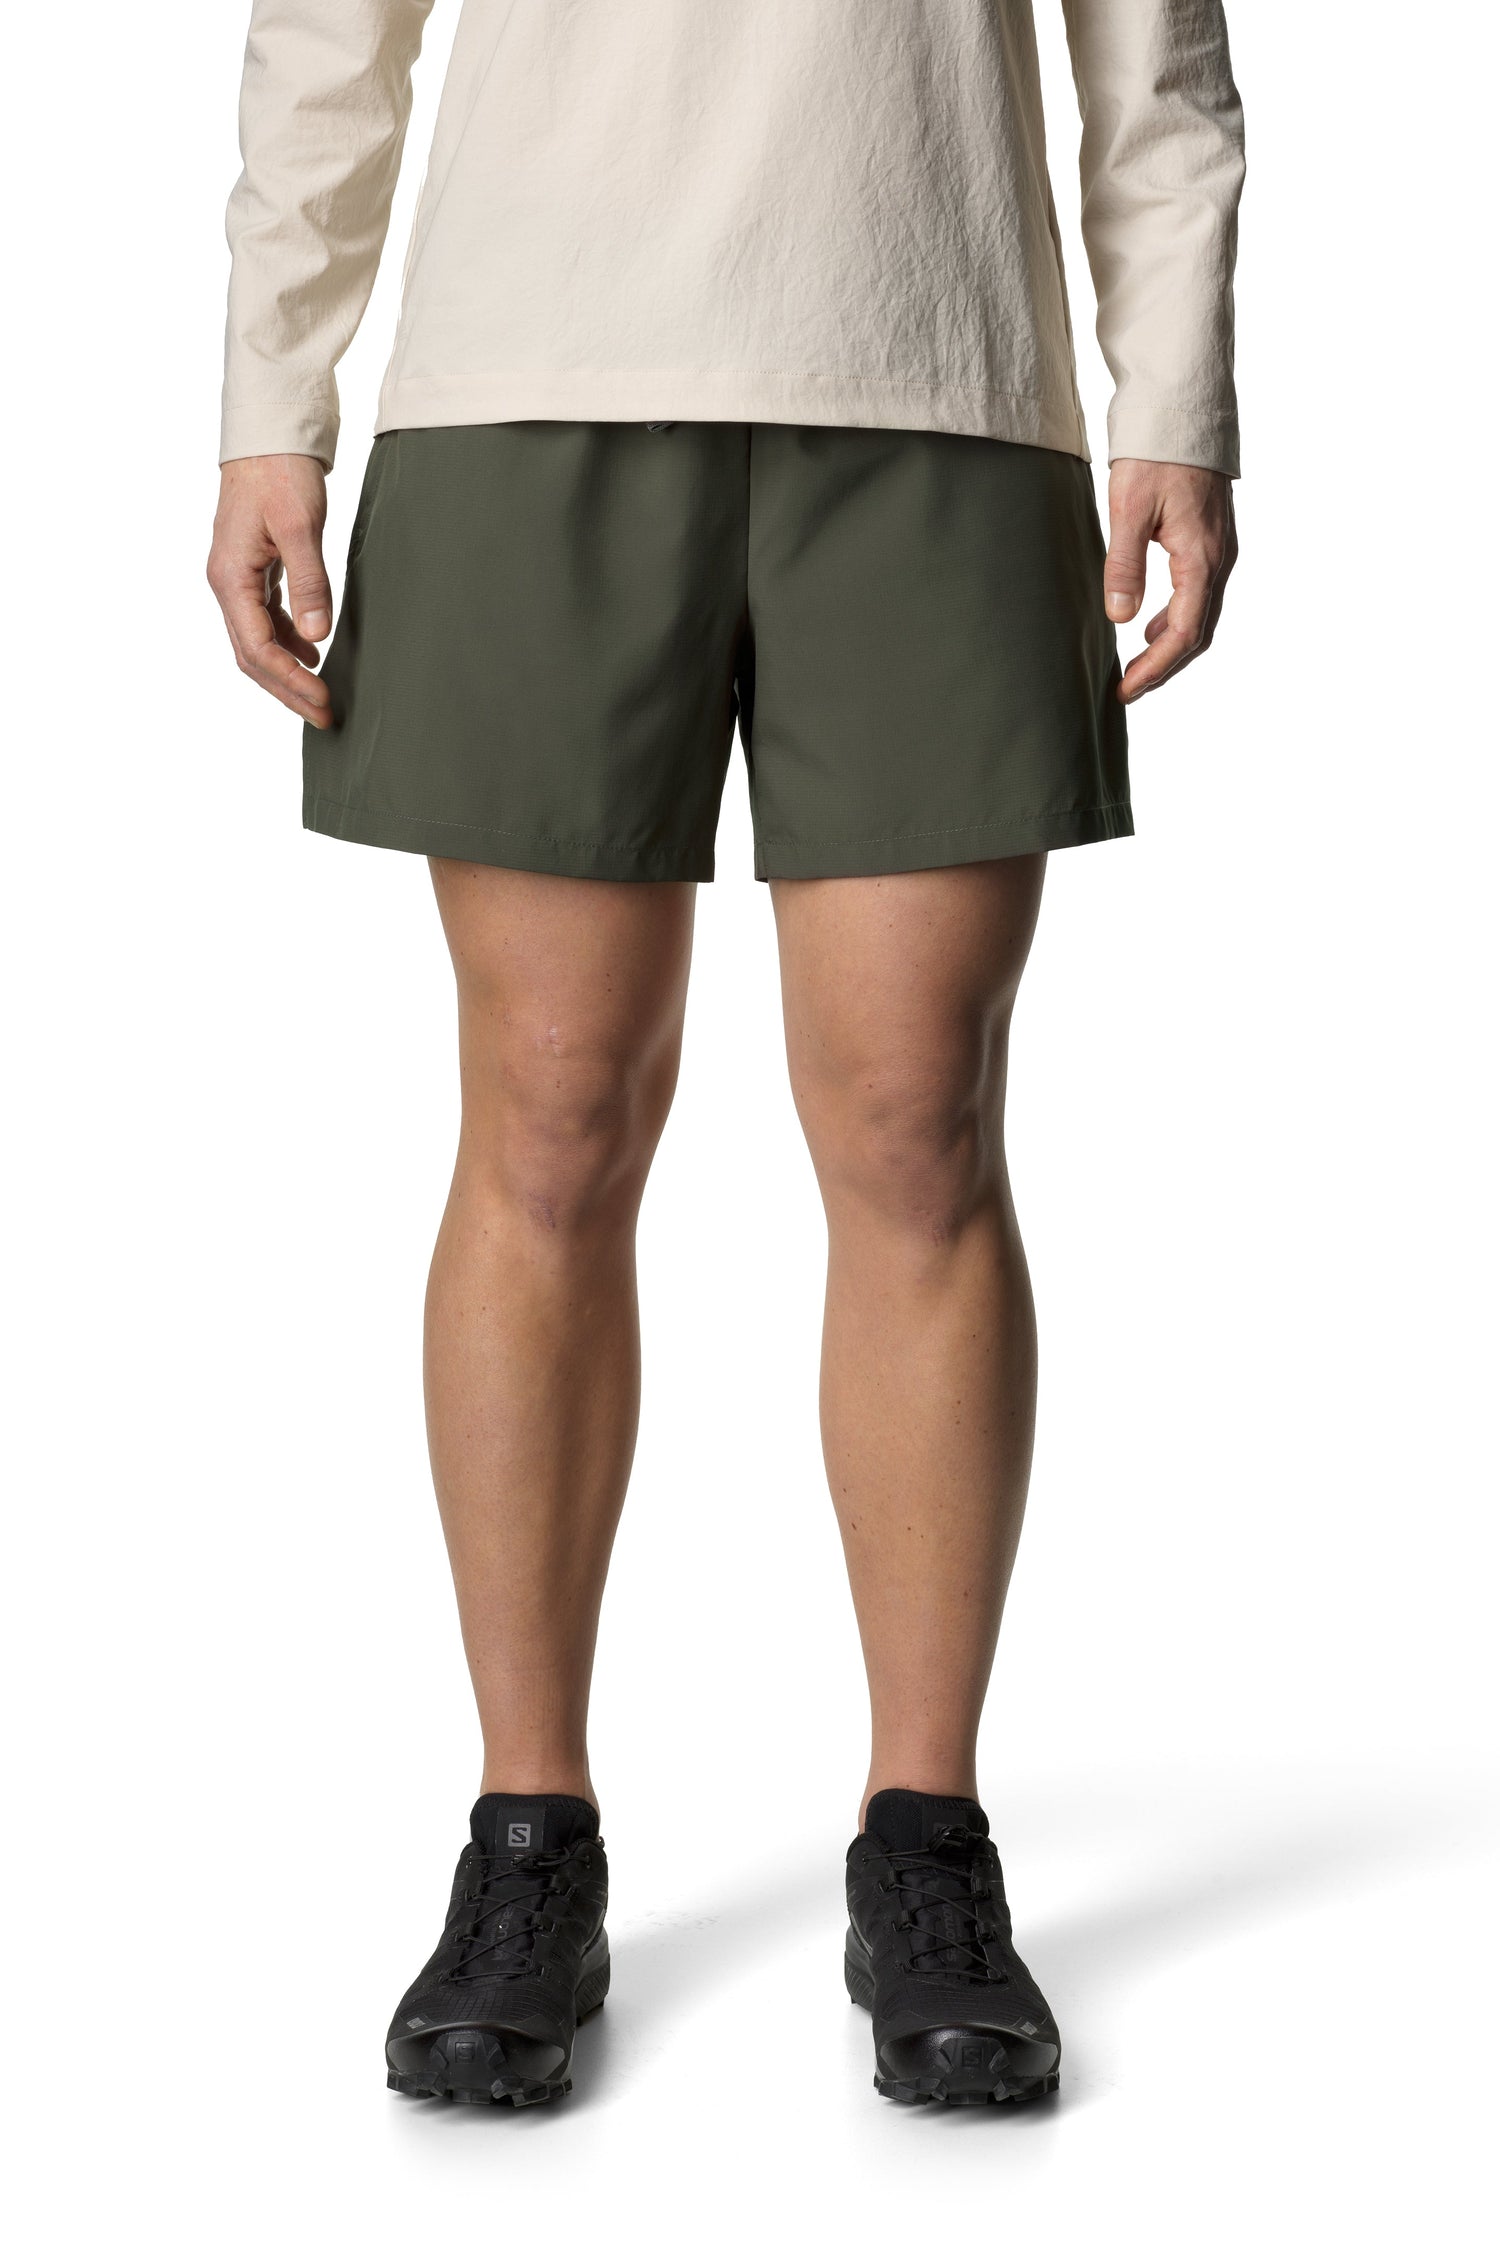 Houdini - W's Pace Wind Shorts - 100% recycled polyester - Weekendbee - sustainable sportswear